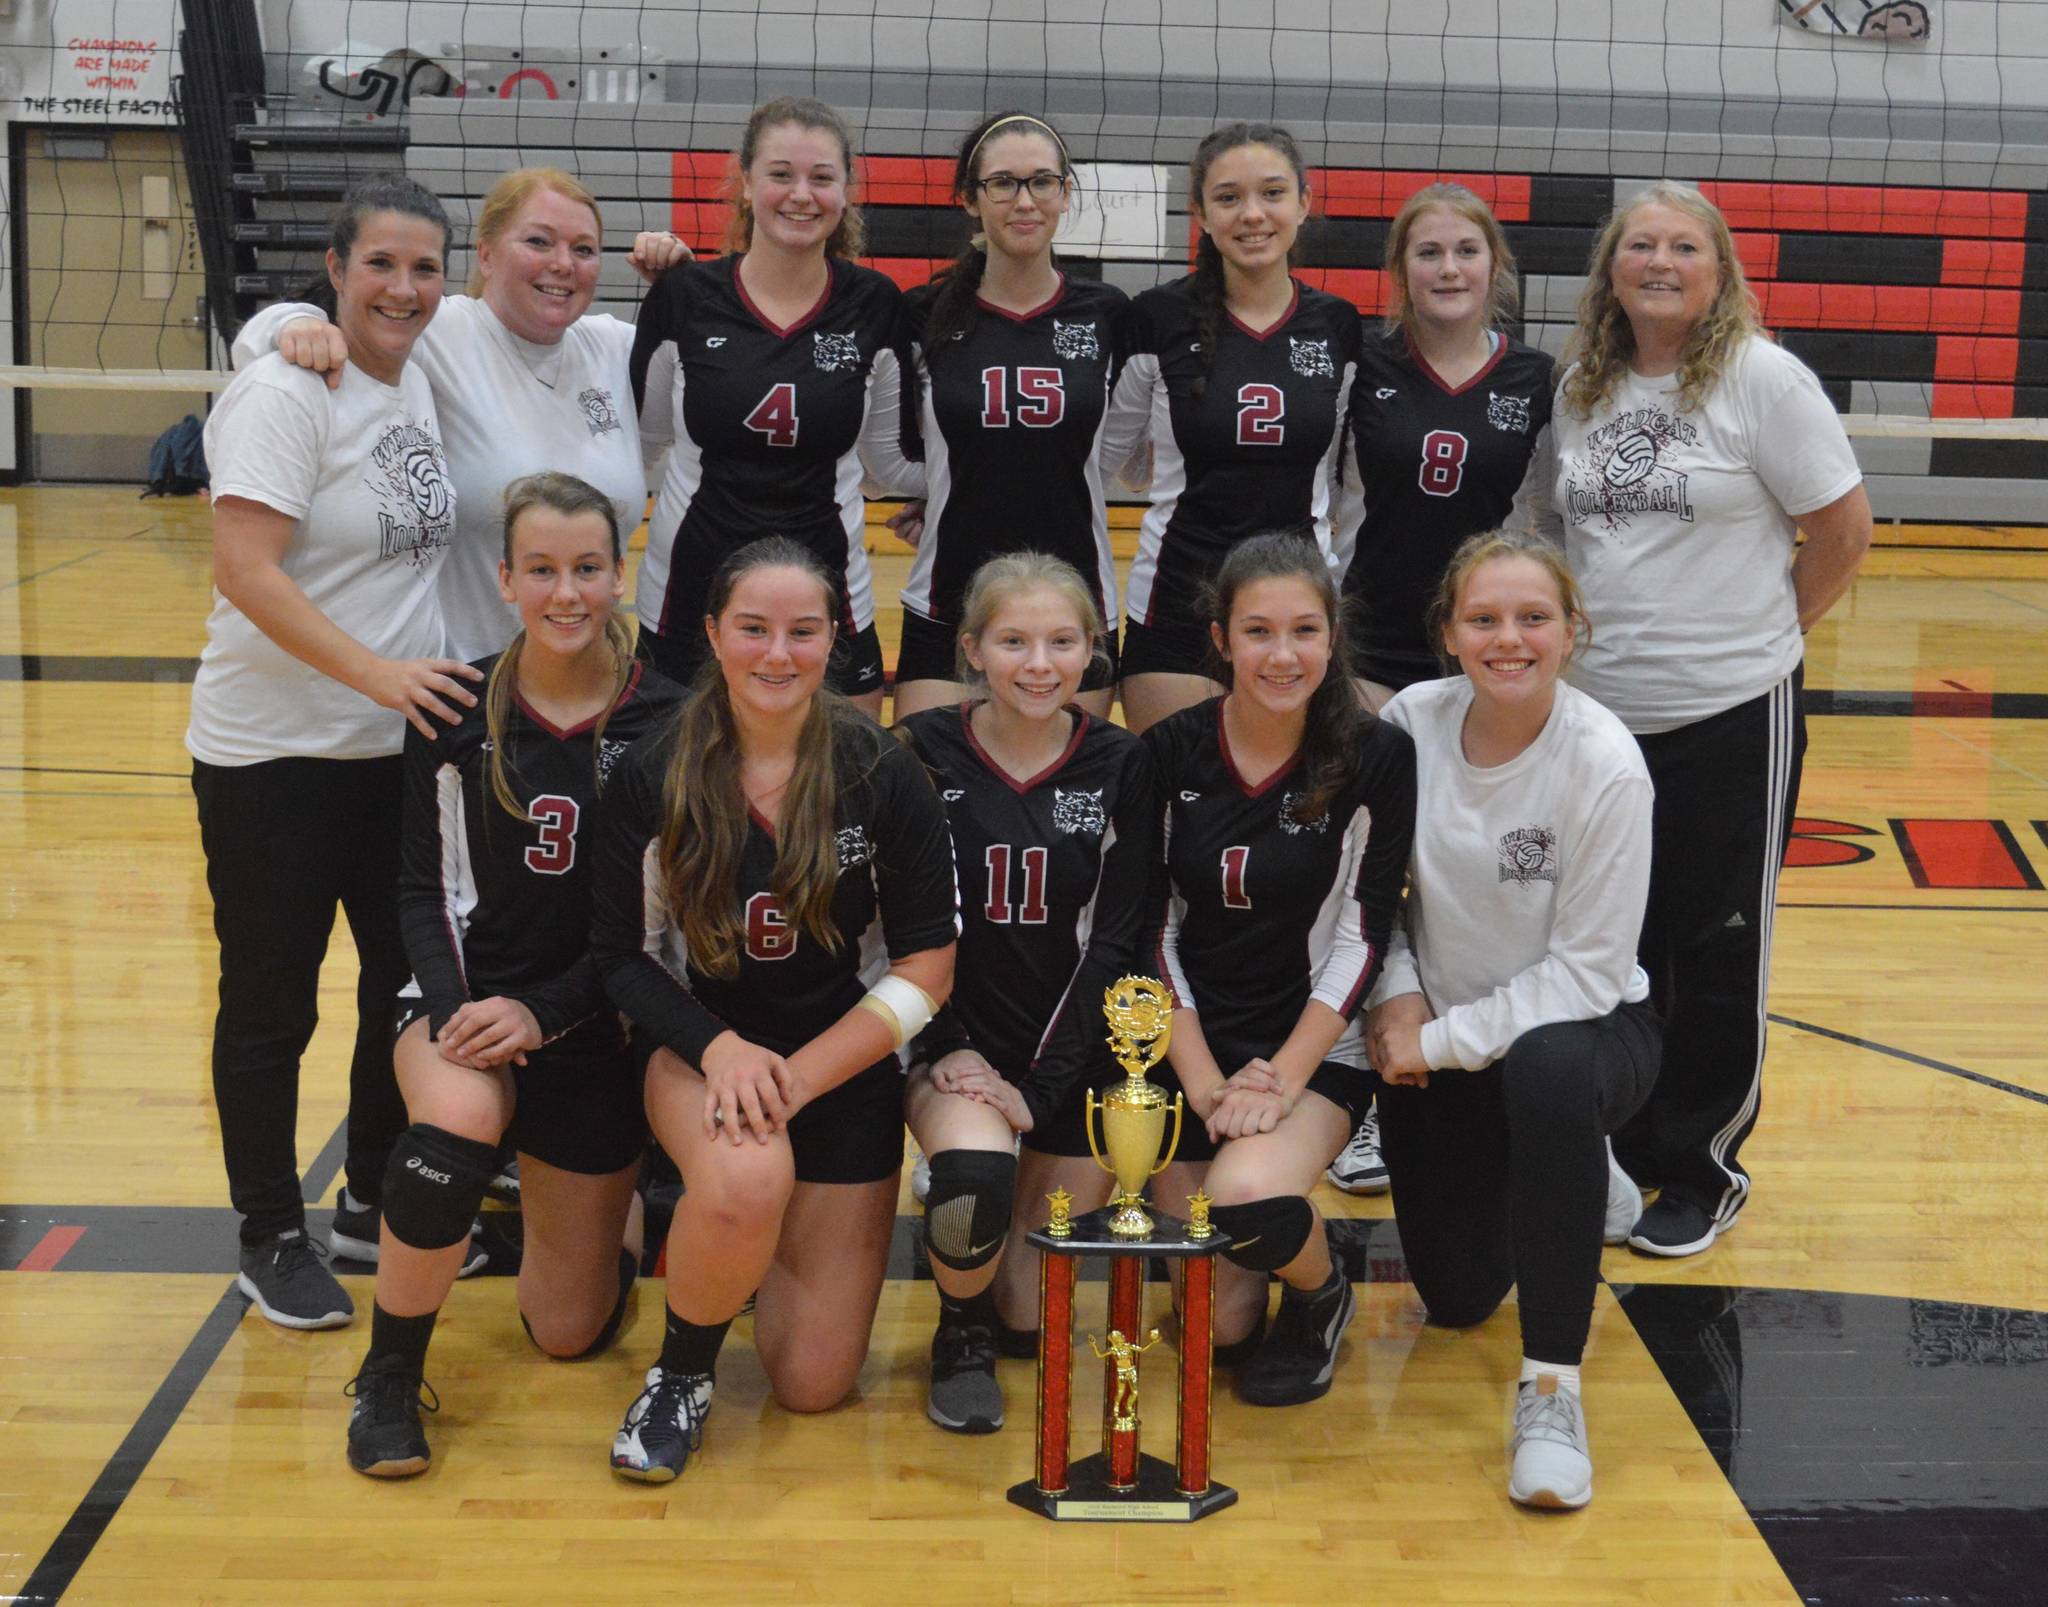 The Ocosta Wildcats volleyball team poses with its first-place trophy after winning the Raymond Tournament on Saturday at Raymond High School. (Photo by Jim Snider)